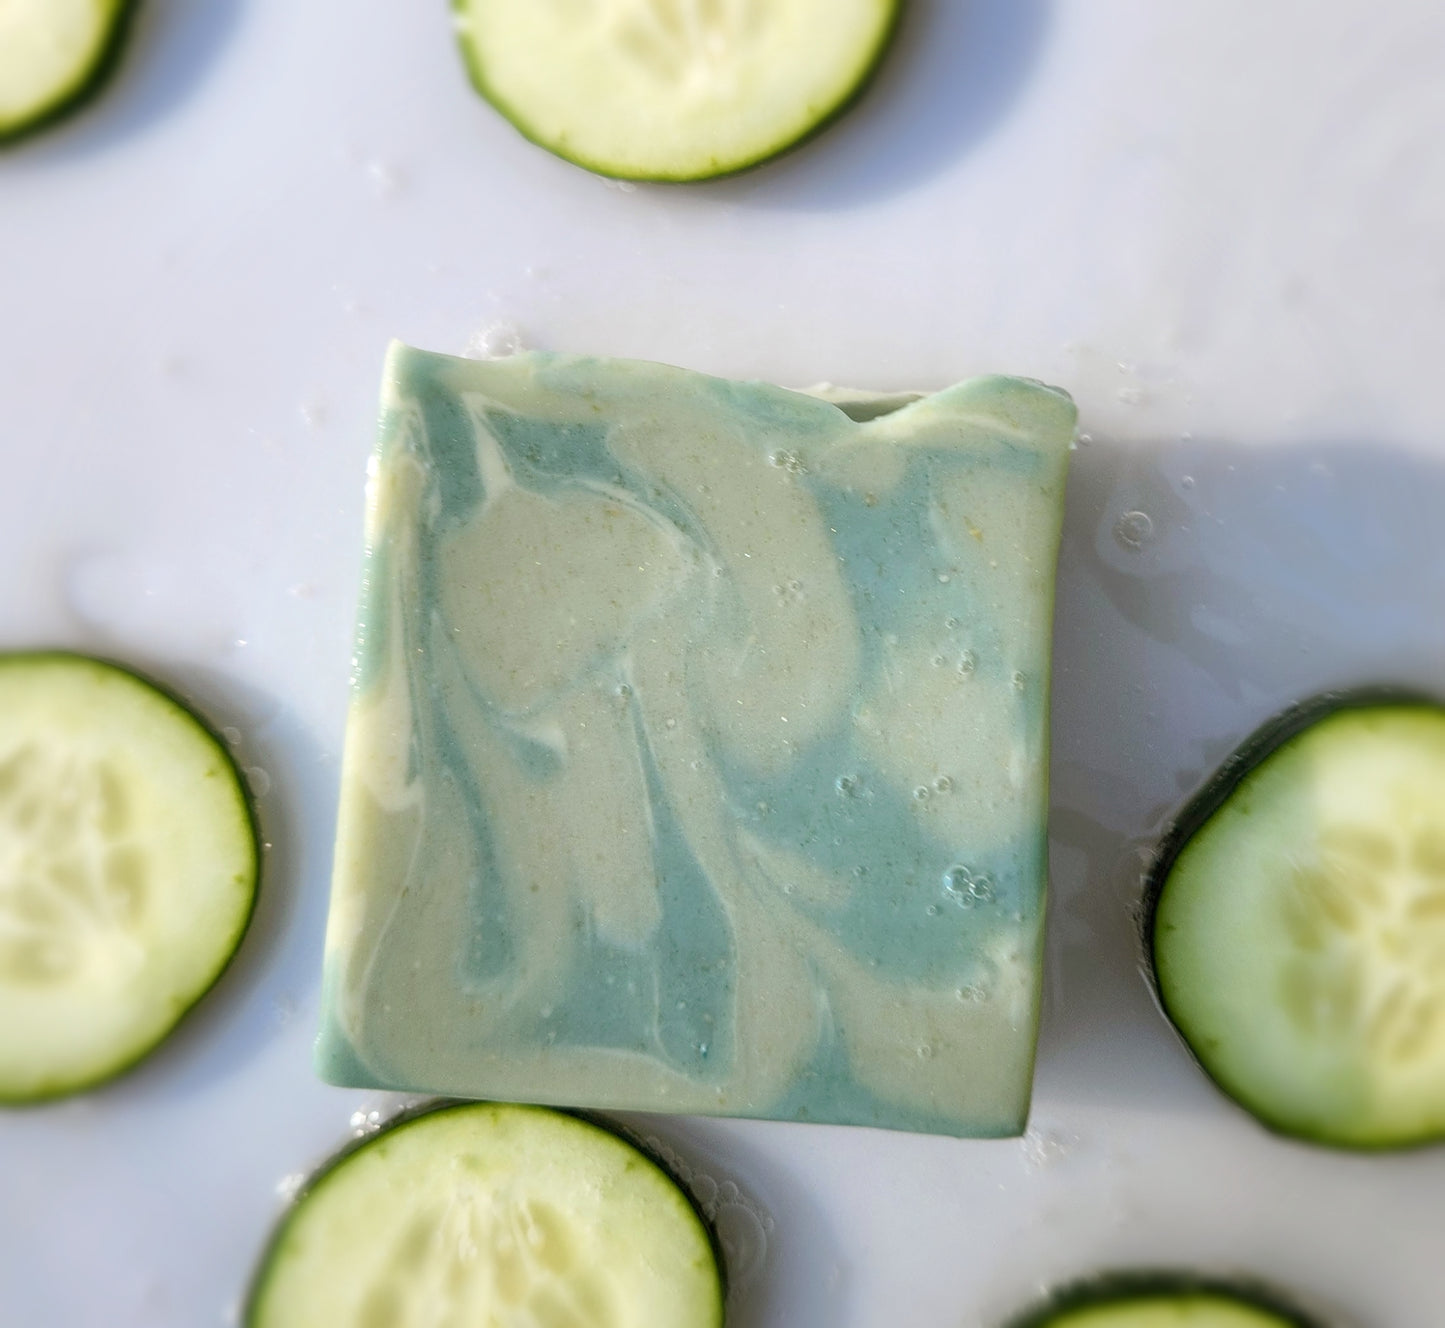 Garden Mint and Cucumber - Cow and Goat Milk Soap